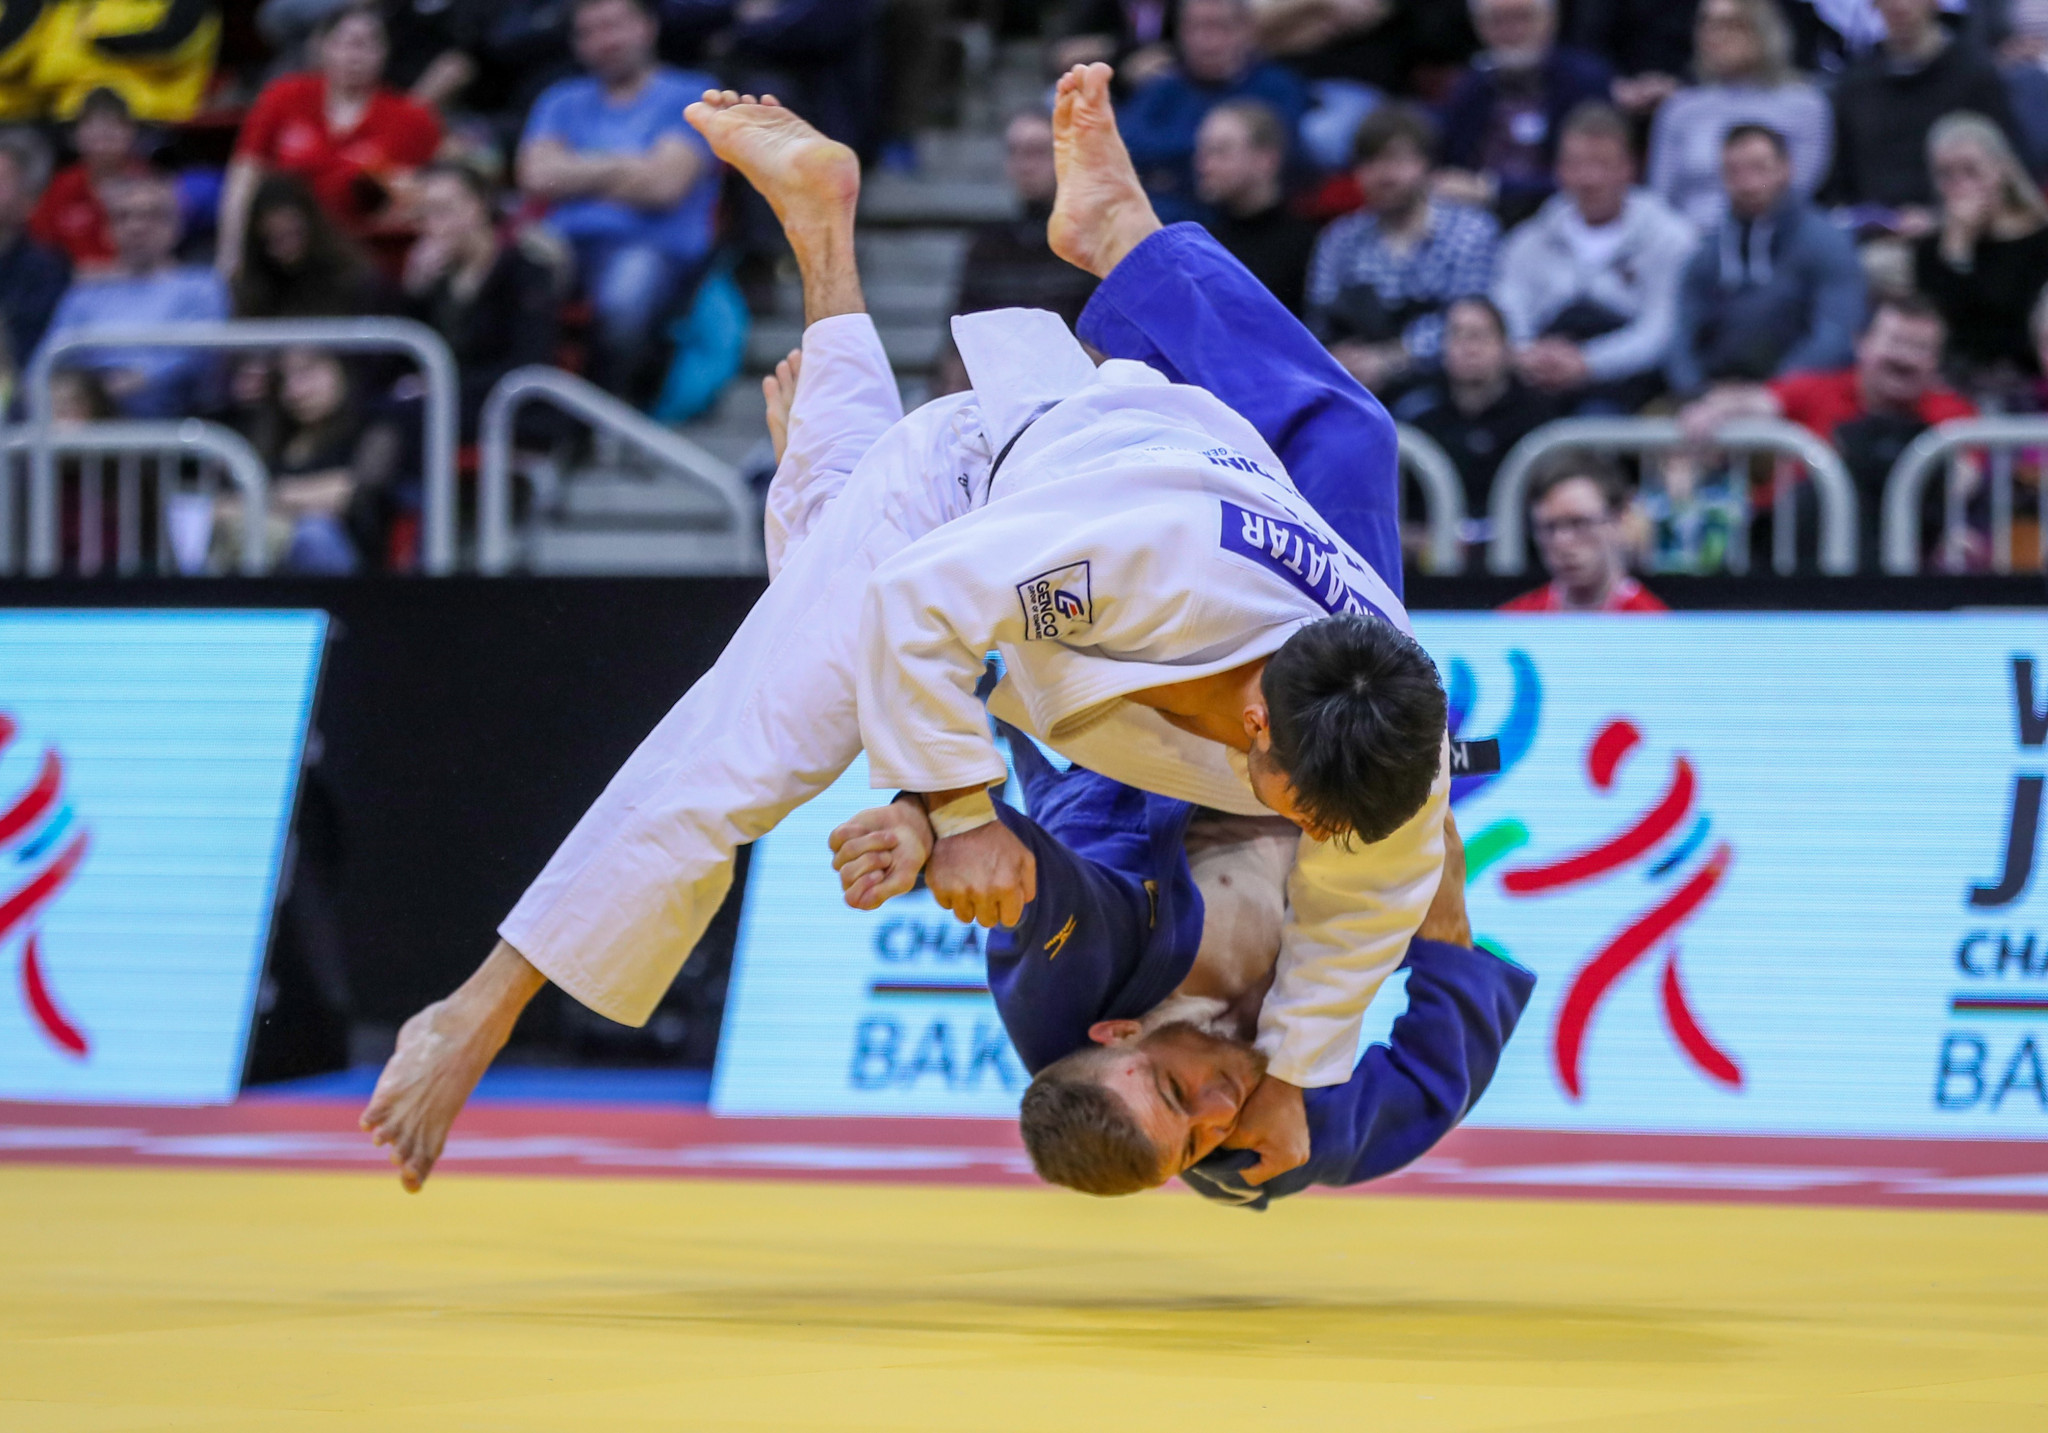 The 2018 IJF World Judo Championships, due to start in Baku in Azerbaijan on Thursday, are among the events set to be broadcast on Eurosport following the announcement of a new three-year deal ©IJF